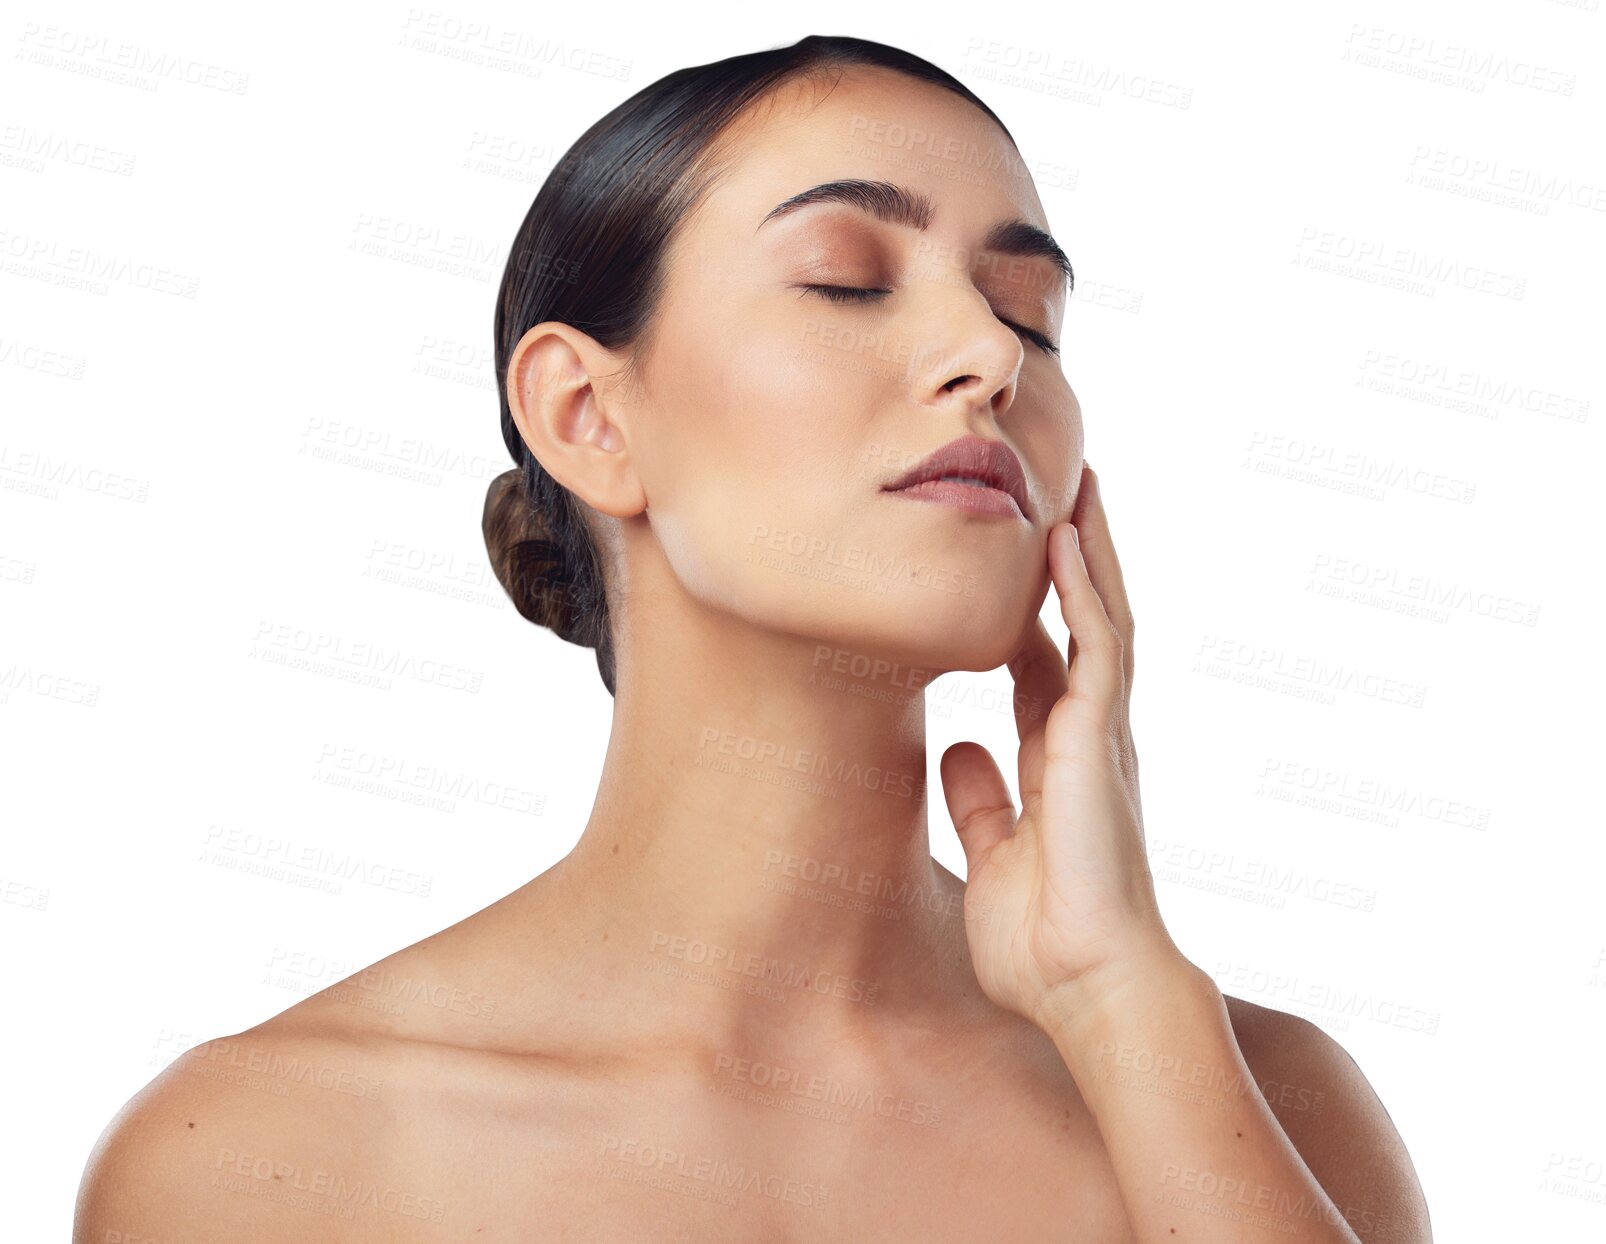 Buy stock photo Skincare, facial and woman thinking or sleeping isolated on transparent png background for beauty and cosmetics. Dreaming, inspiration and model or person with face, skincare wellness and dermatology